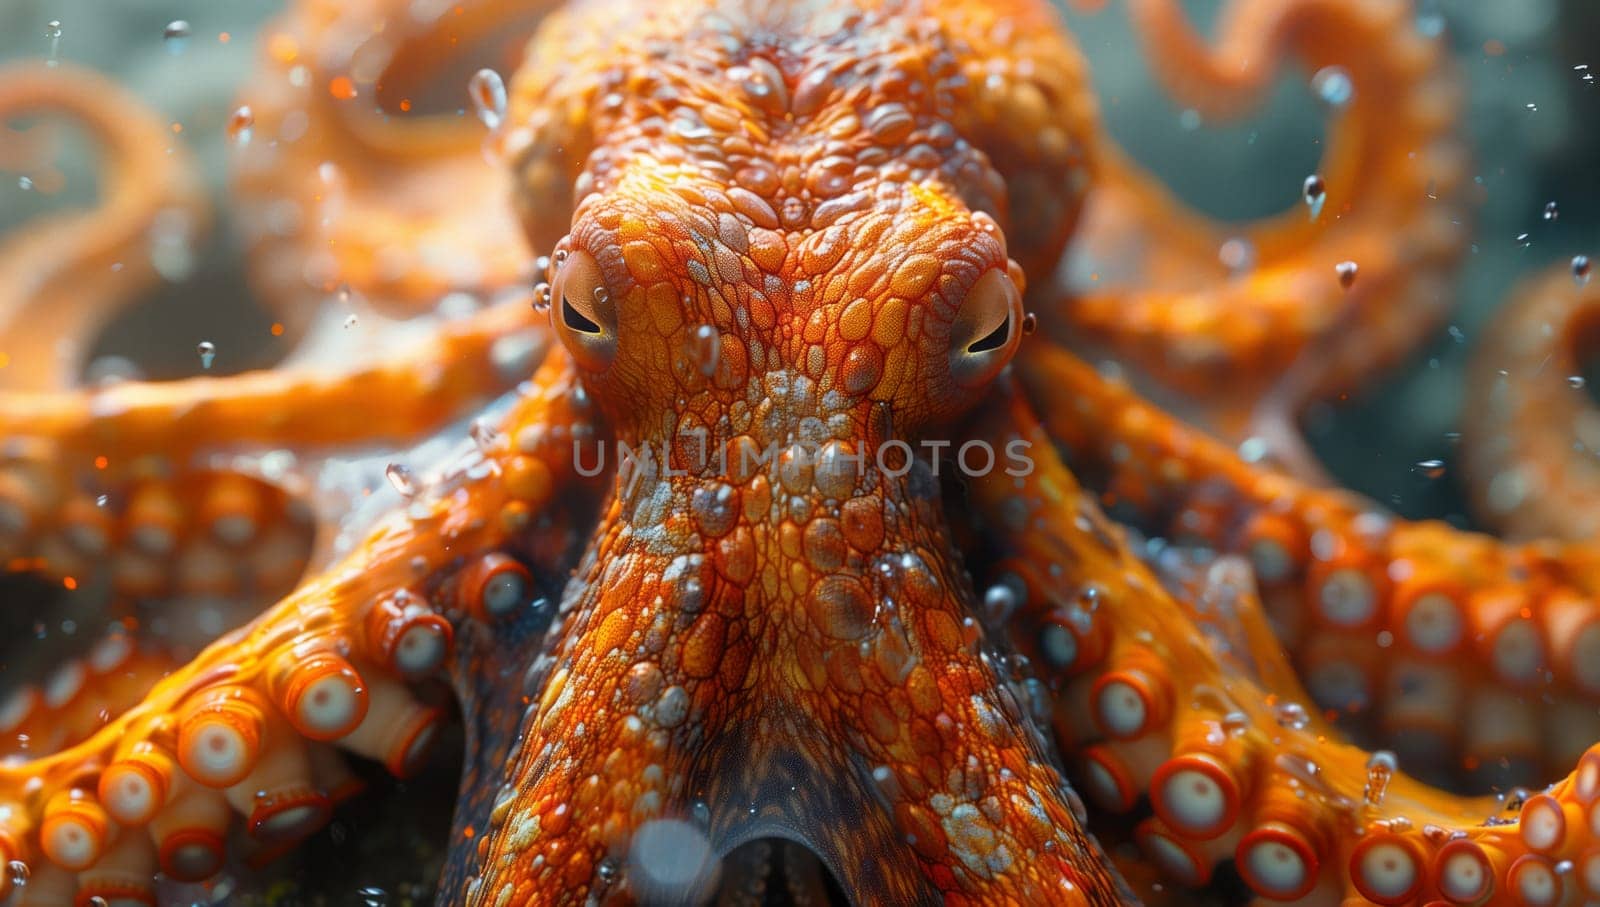 A marine invertebrate, the octopus is swimming underwater and making eye contact with the camera, potentially serving as a delicious ingredient in various cuisines